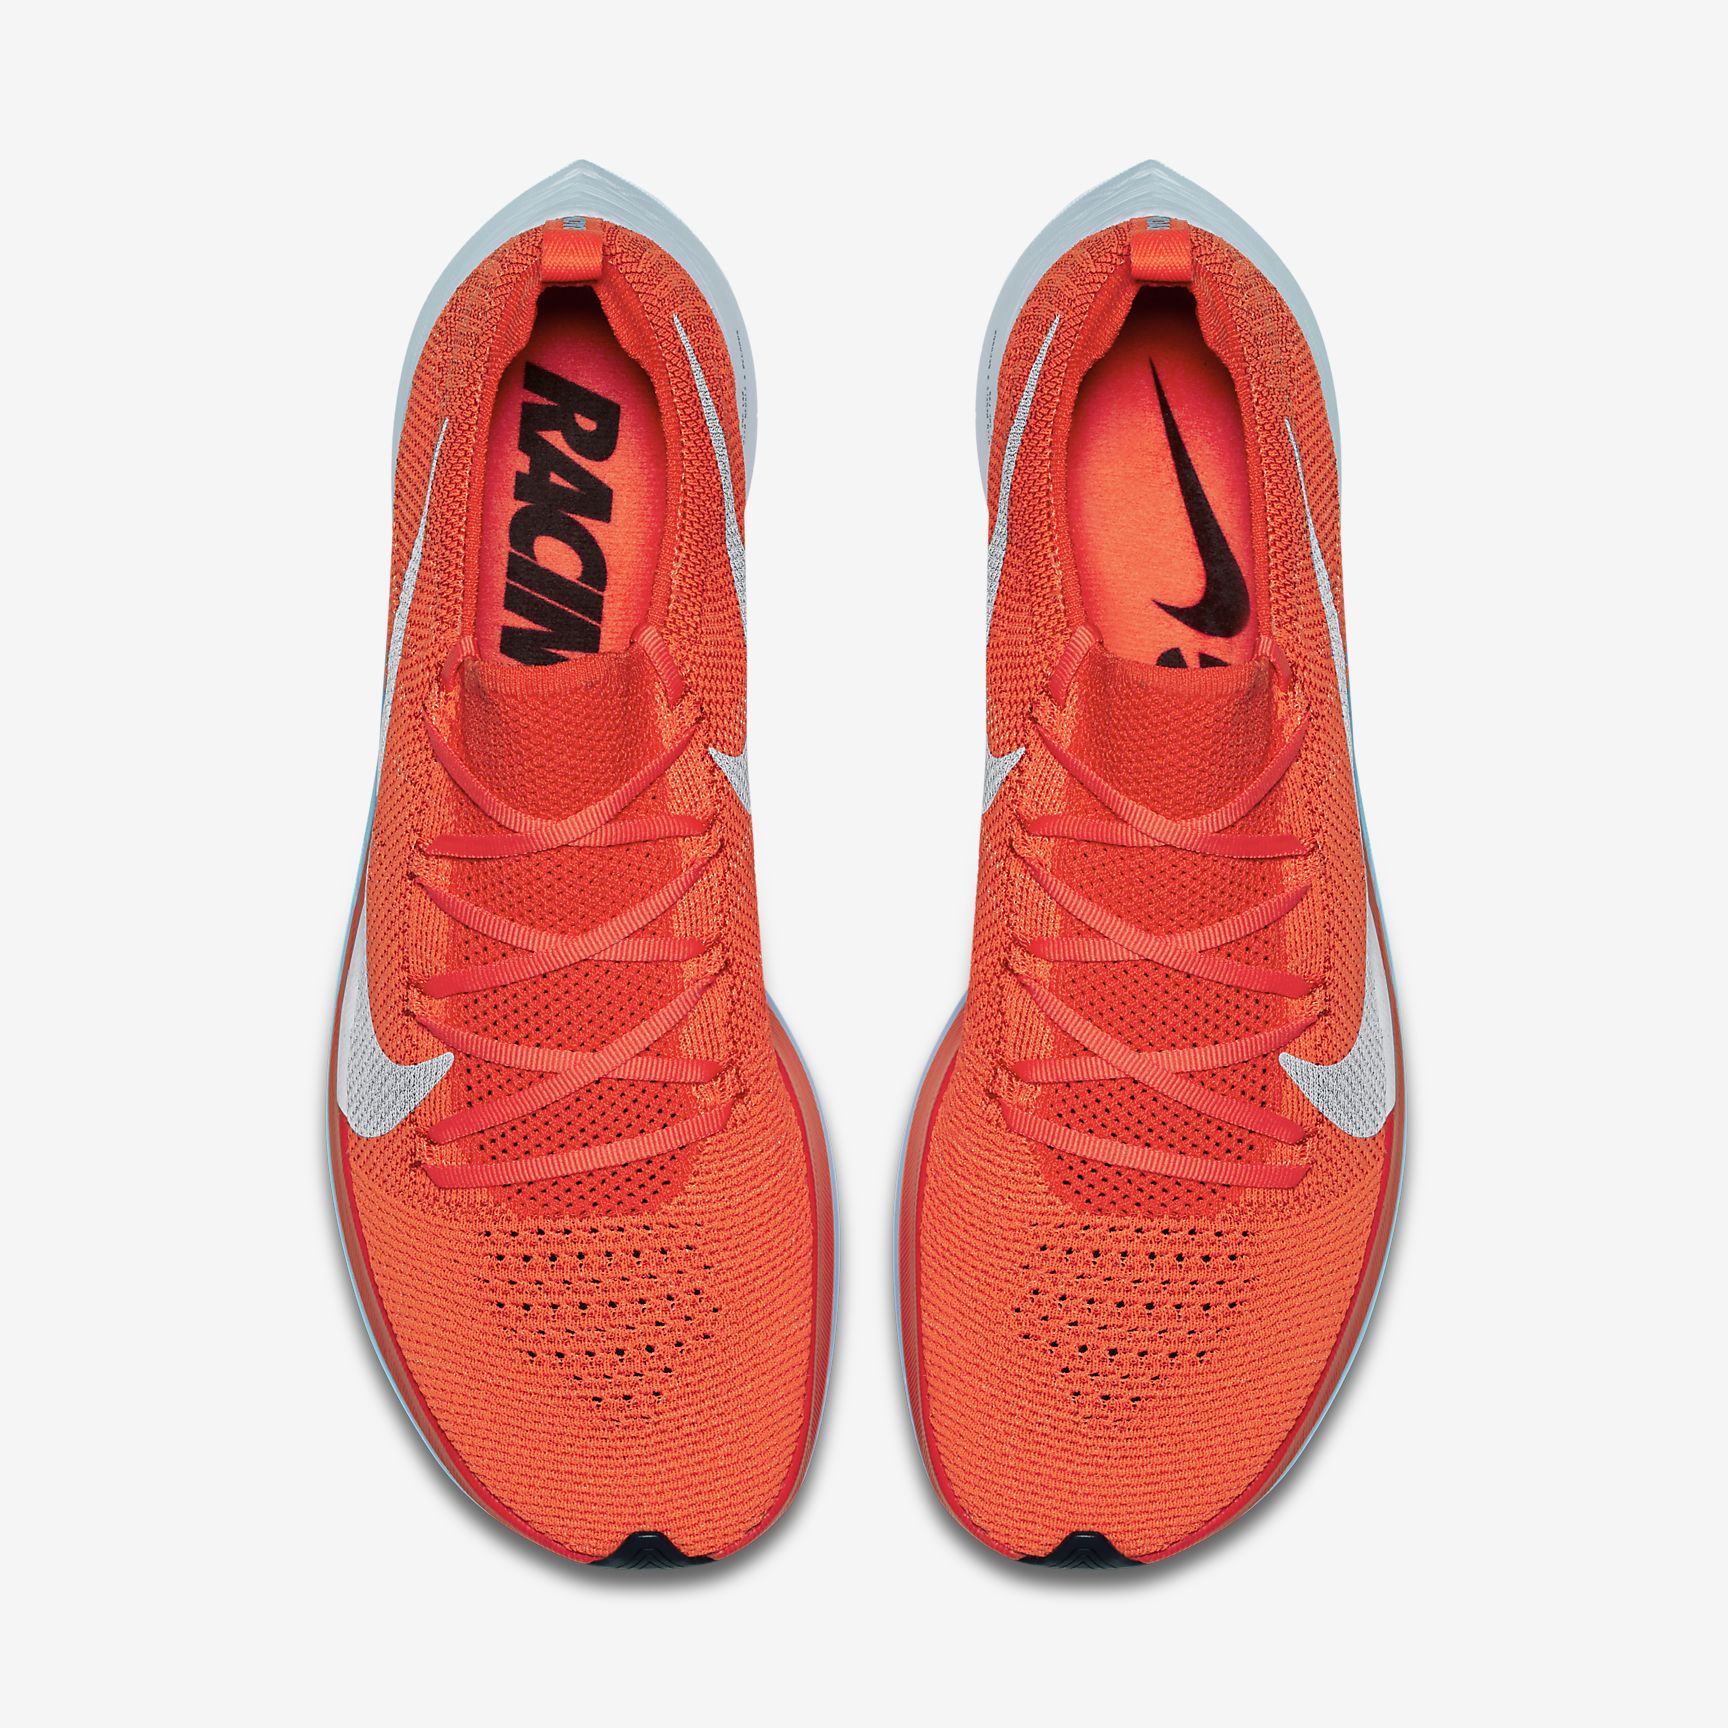 The Nike VaporFly 4% Flyknit Just